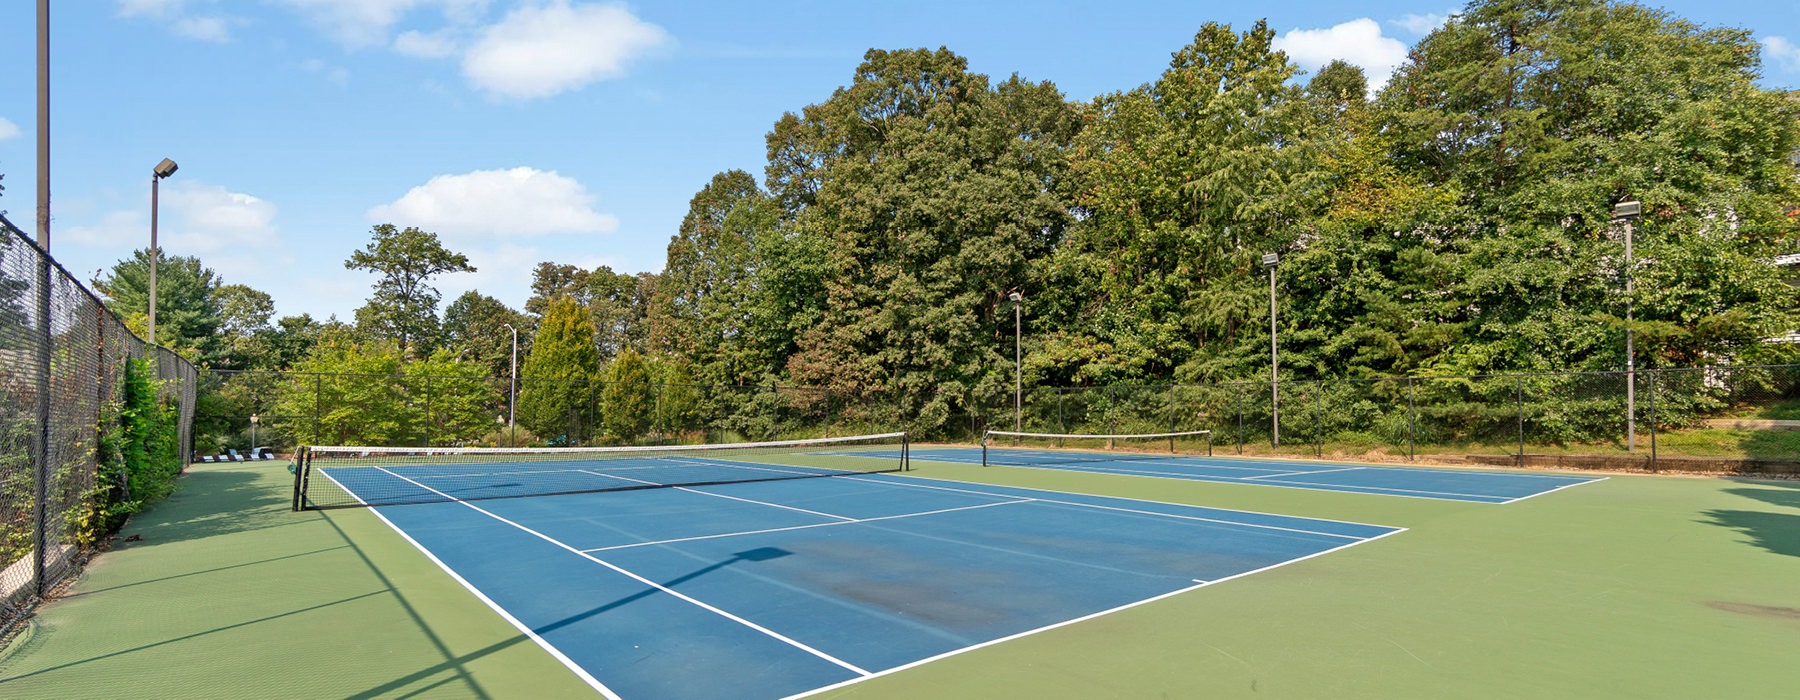 Large tennis courts